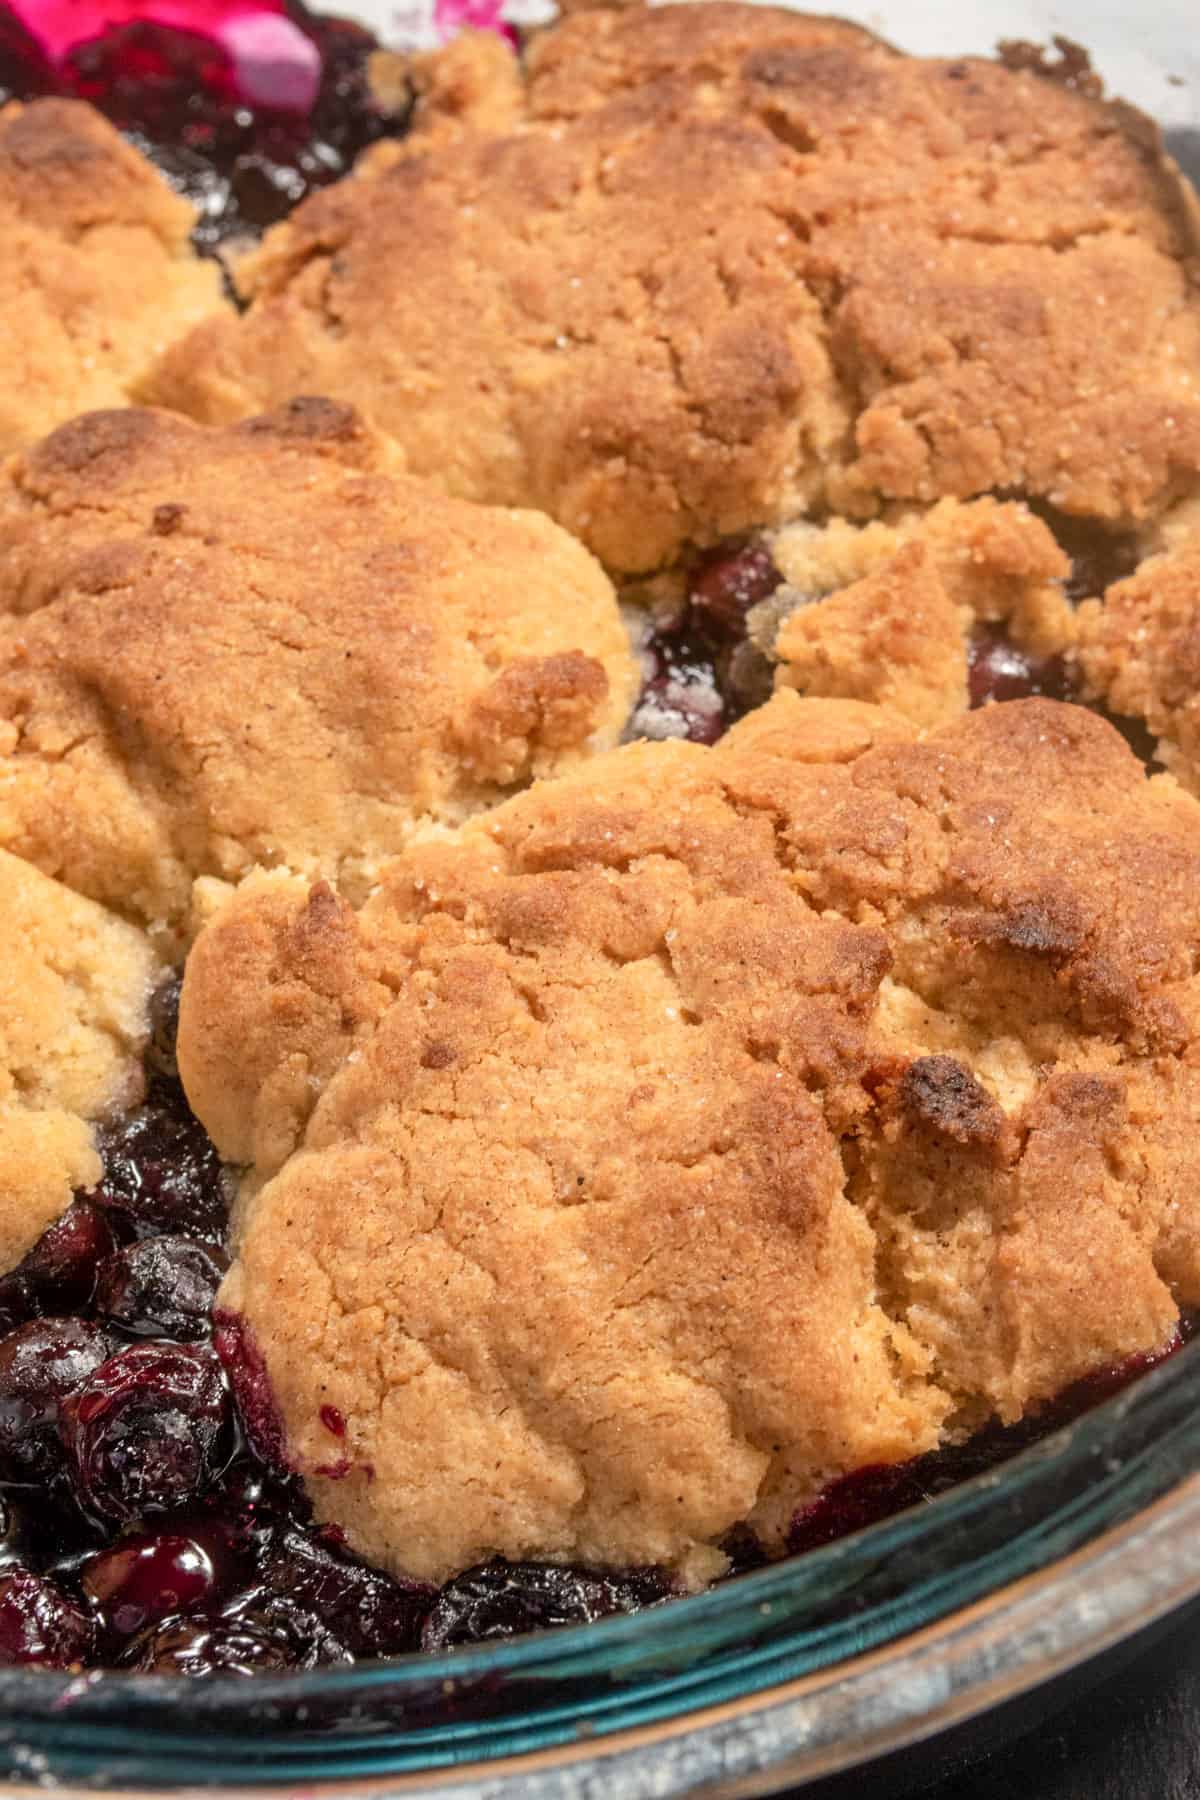 Golden brown vegan blueberry cobbler cooling down inside a large pyrex baking tray. The blueberries are bubbling. 